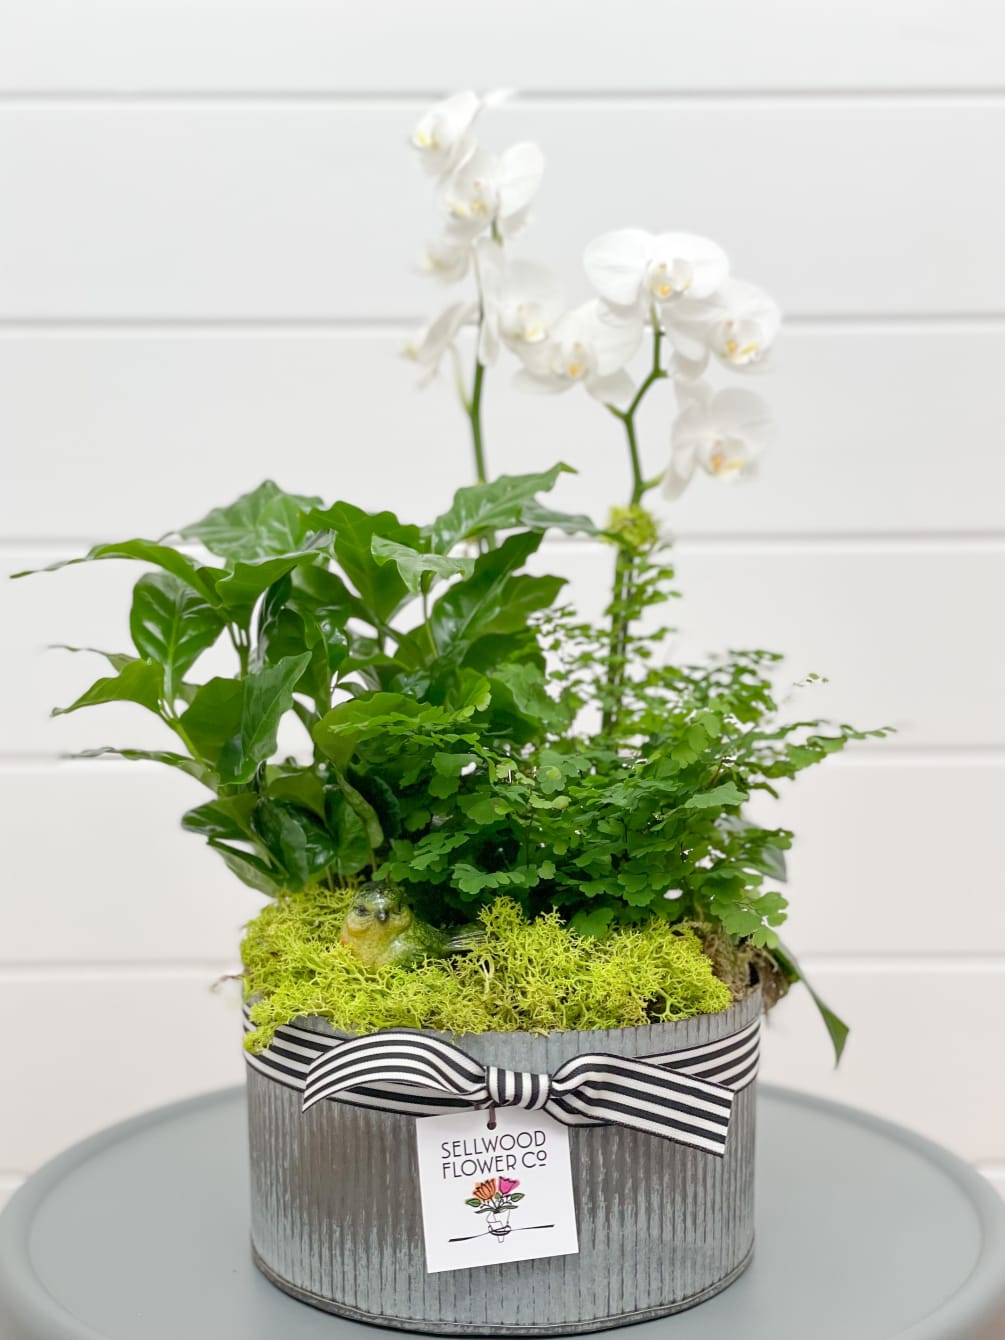 This living arrangement includes a collection of green and flowering plants that